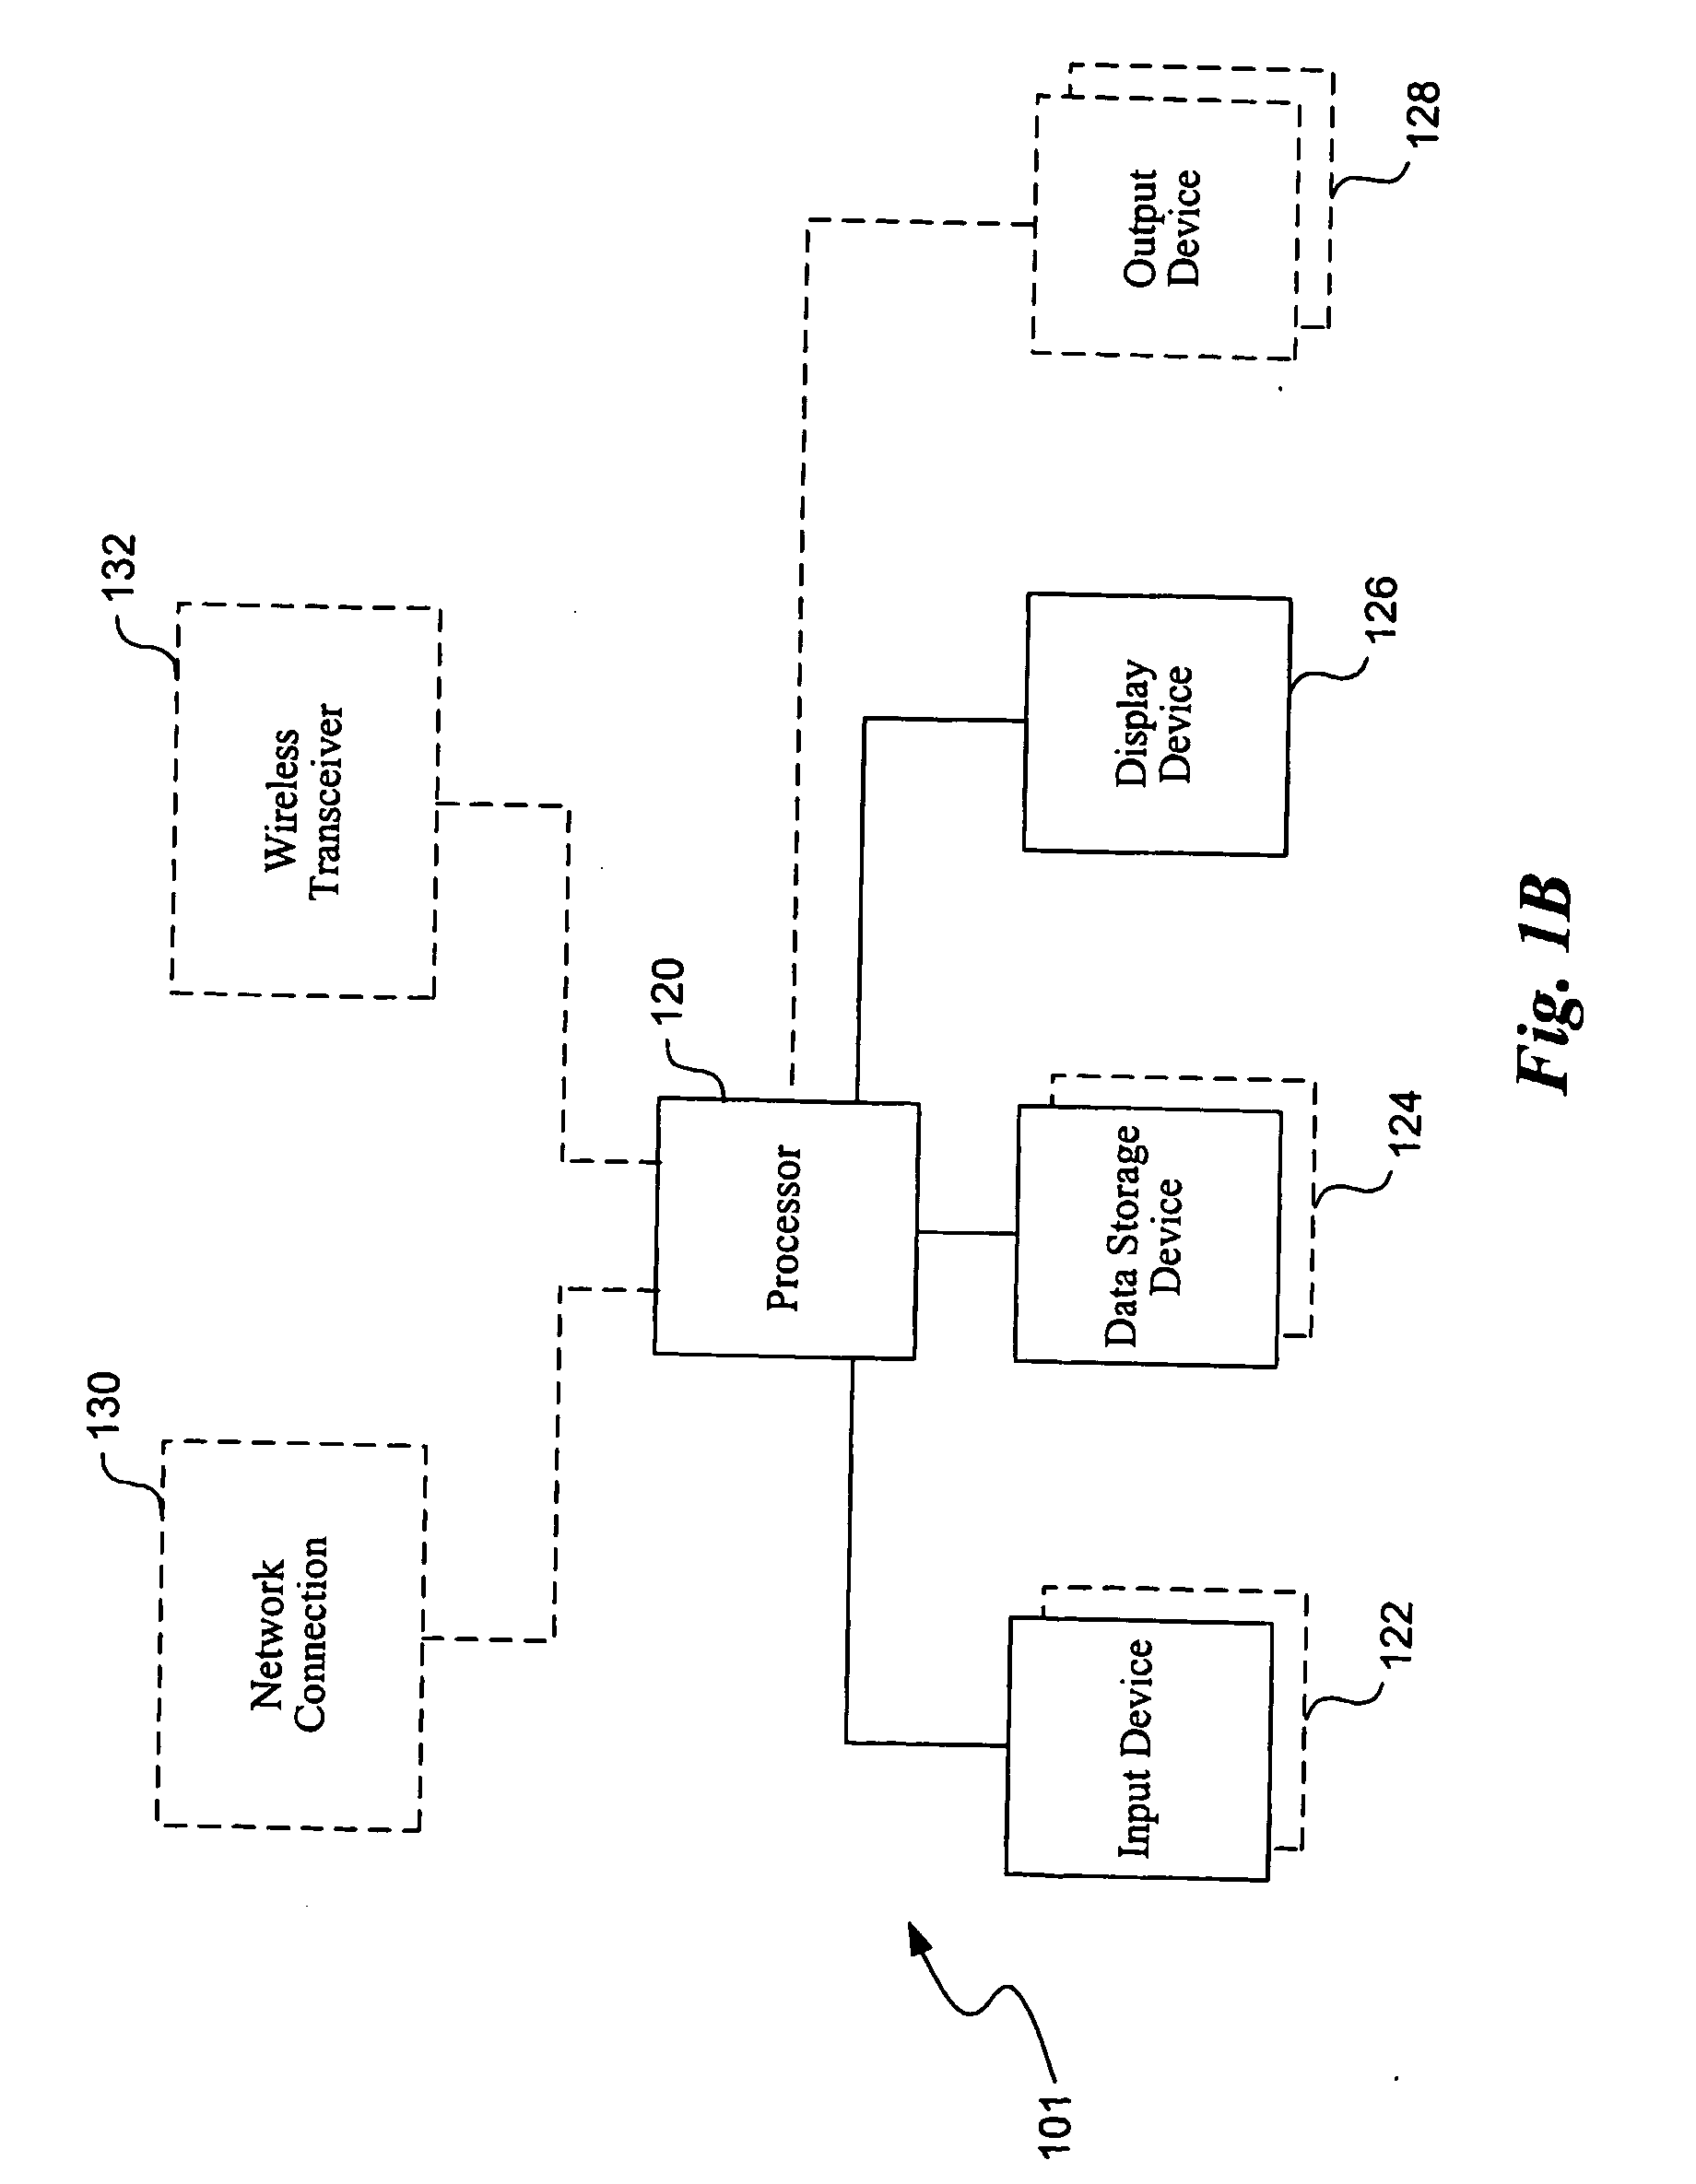 Self-configuring, self-optimizing wireless local area network system